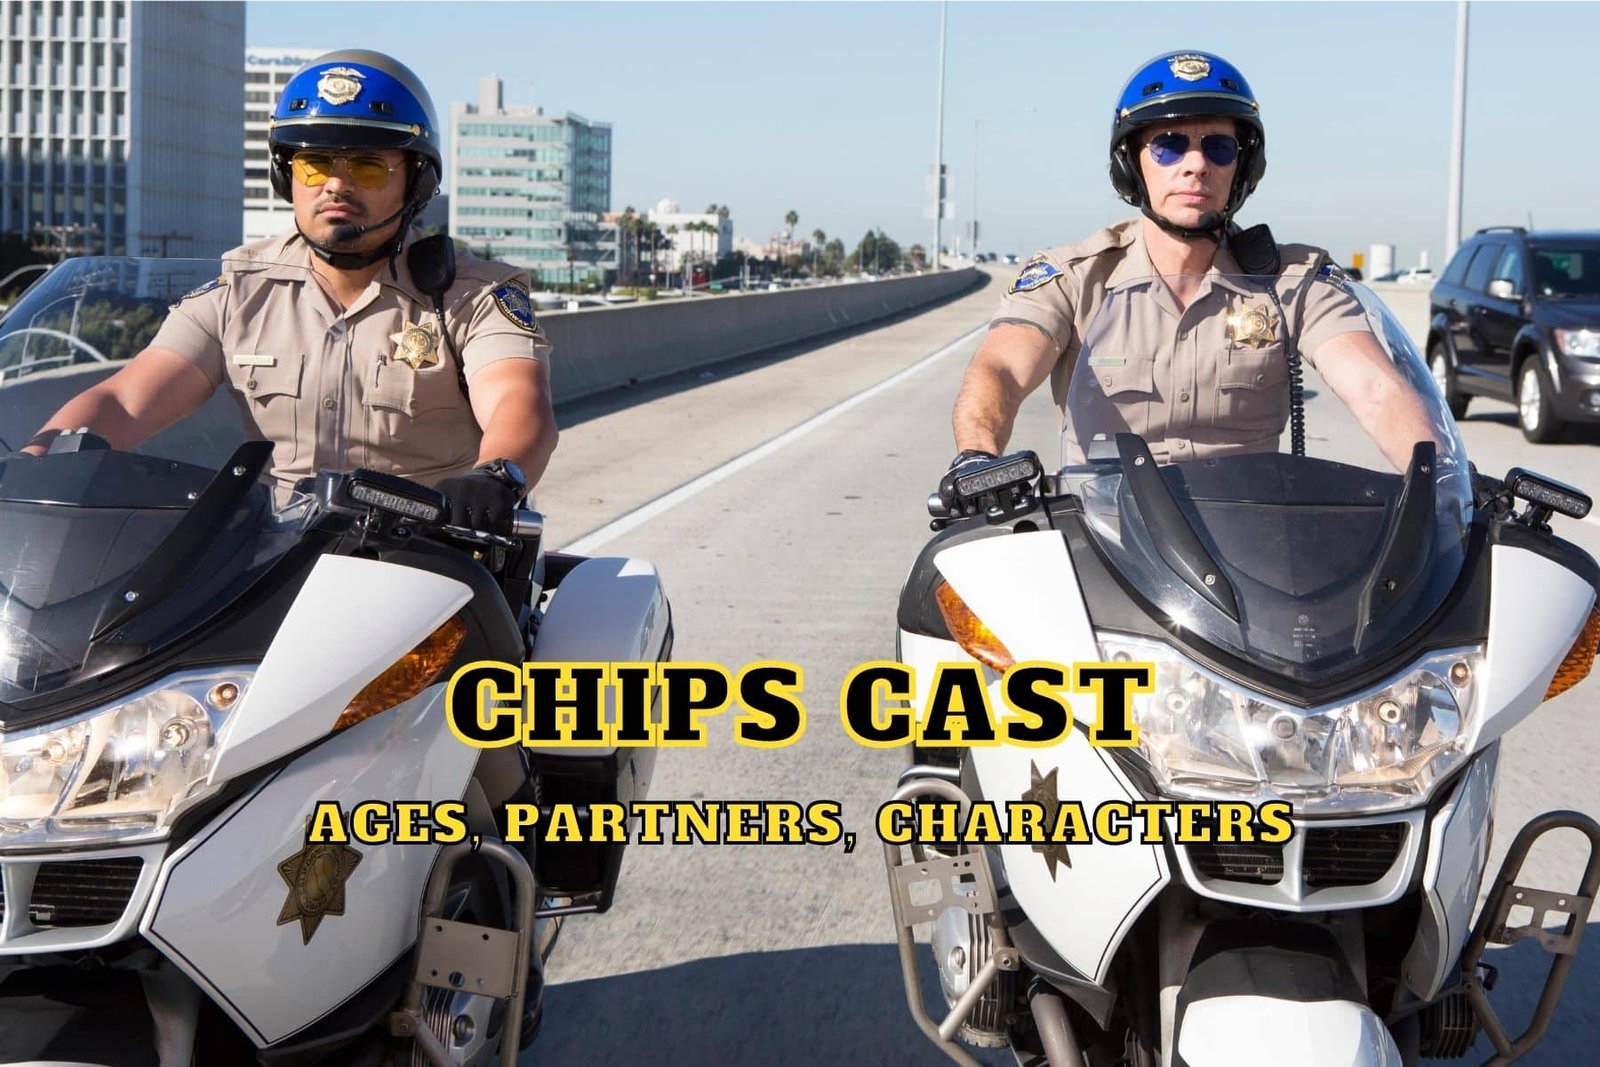 CHIPS Cast - Ages, Partners, Characters